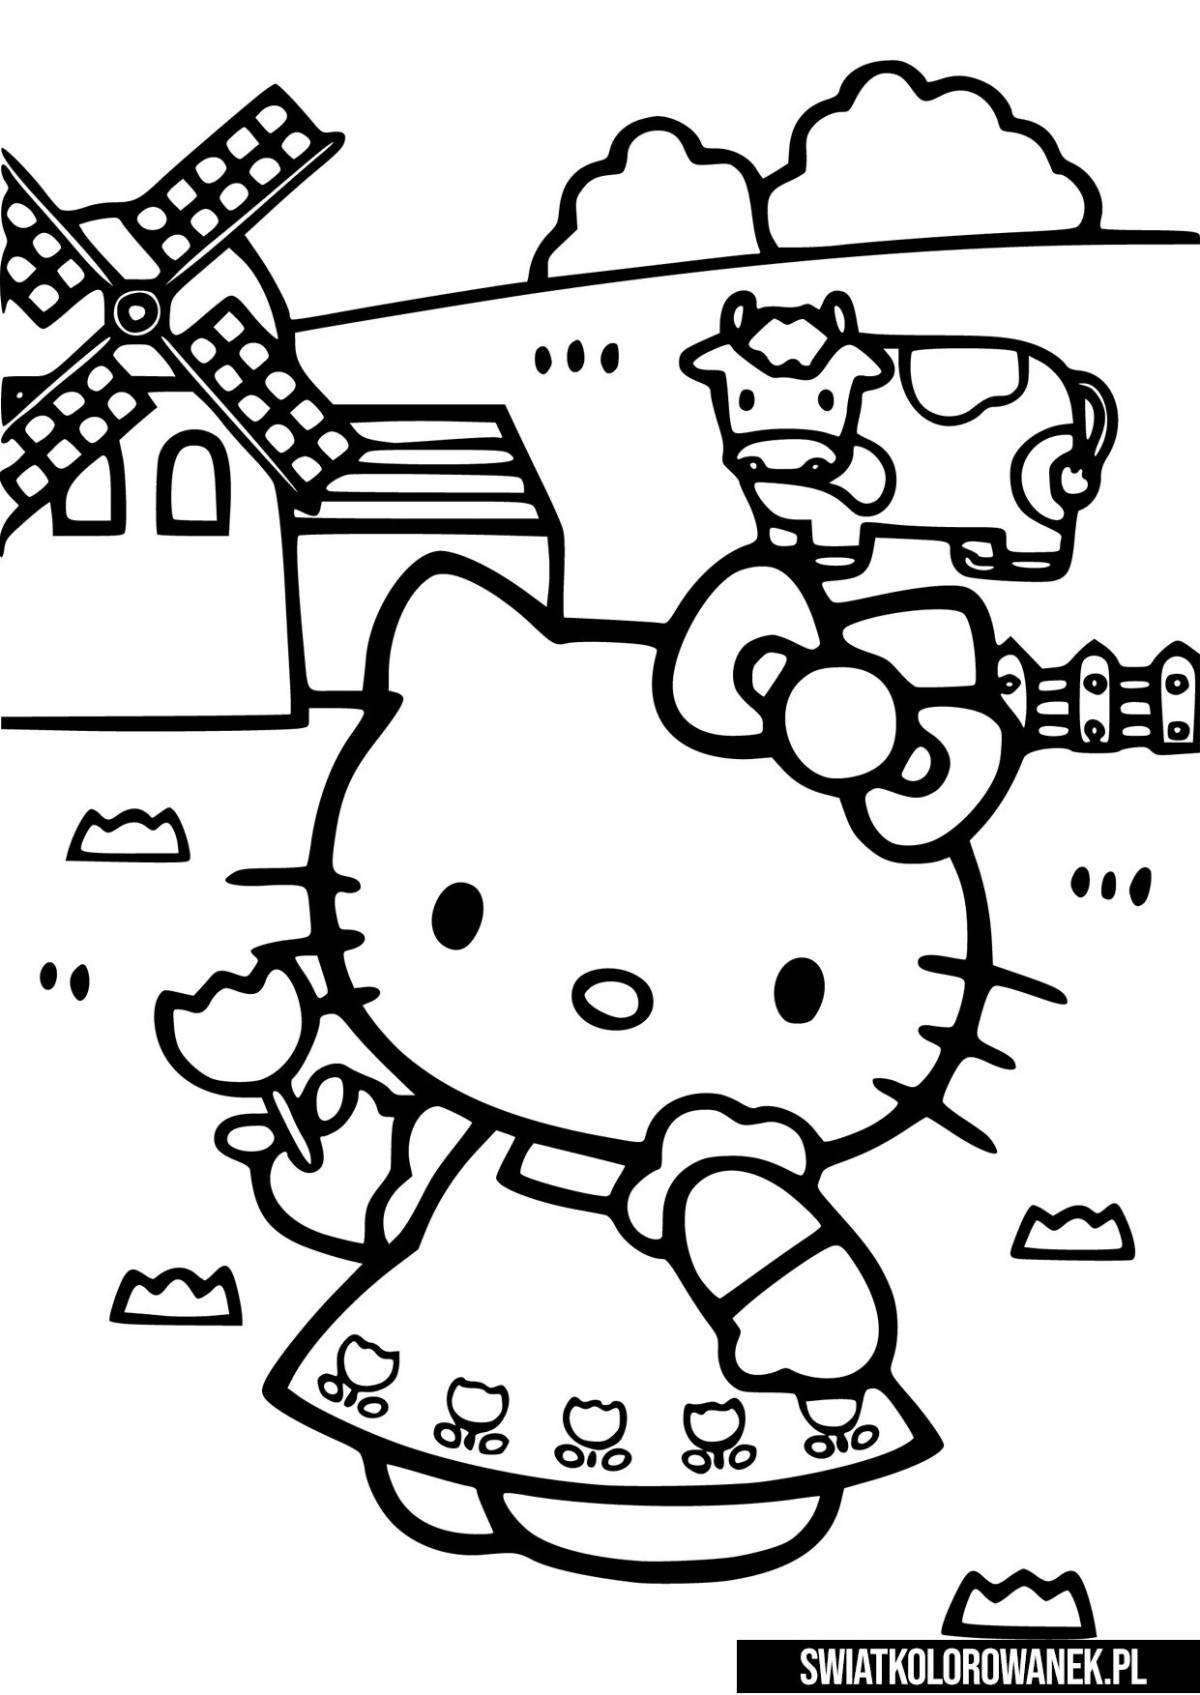 Cute little hello kitty kuromi coloring page